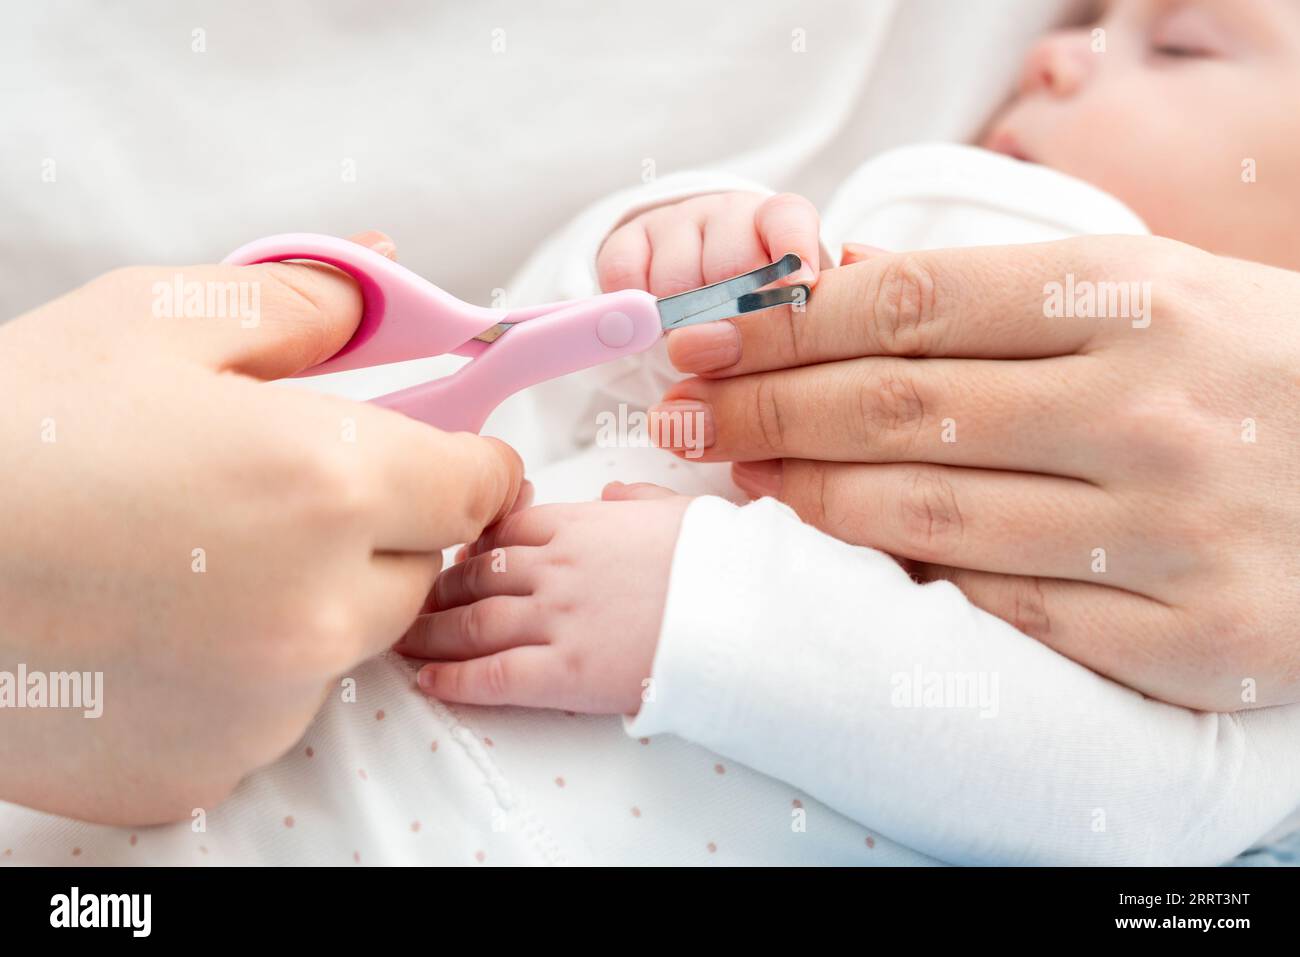 A man cuts her nails child hygiene. men's hands hold nail scissors Stock  Photo by Vailery